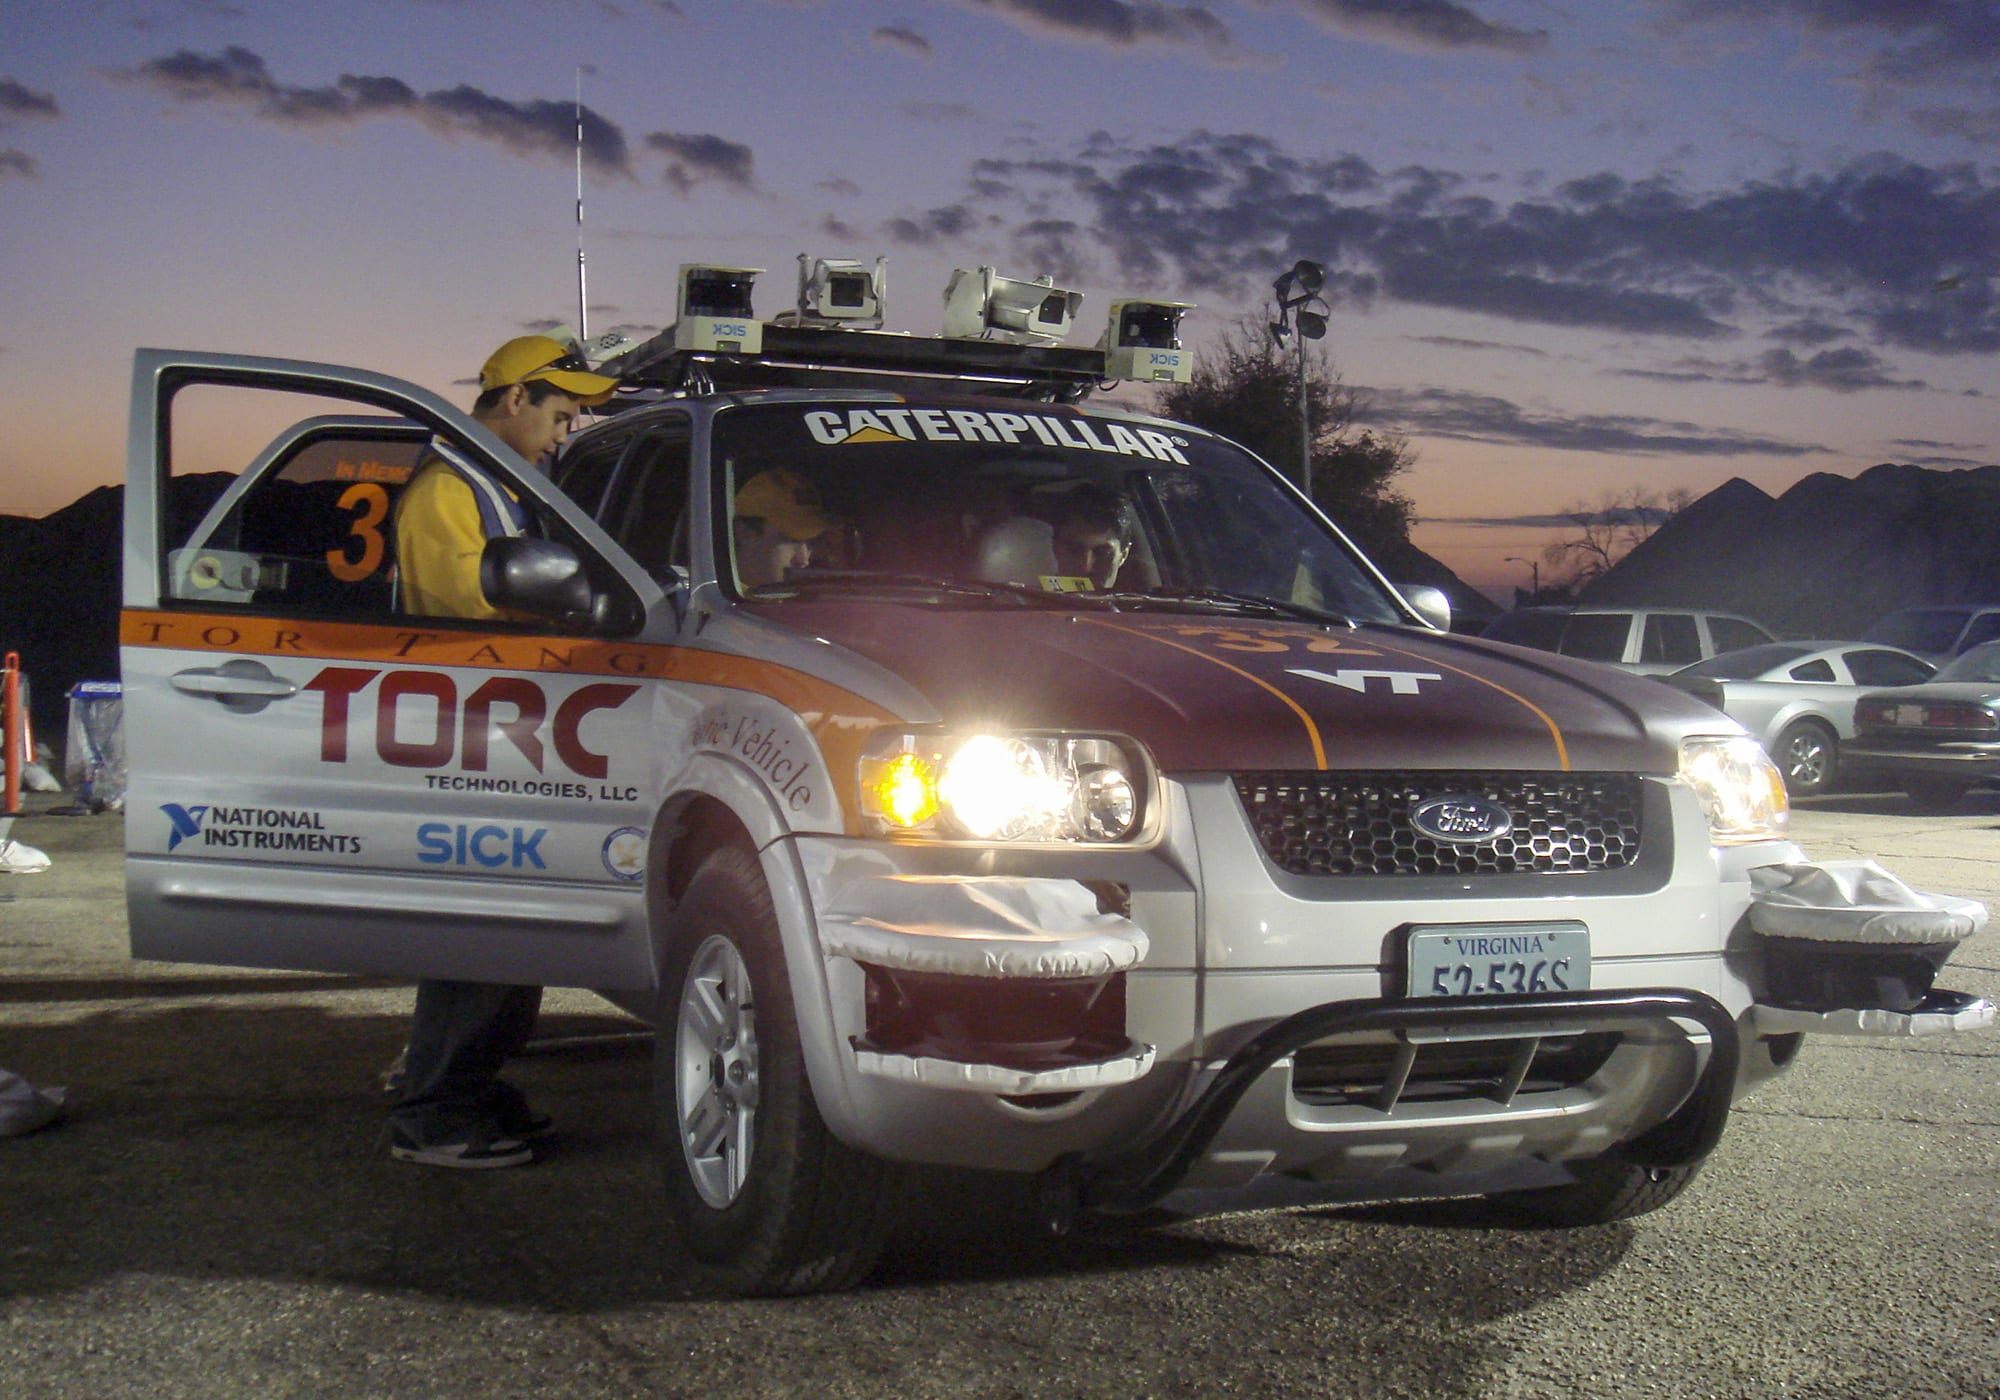 Team members from Victor Tango get their vehicle, Odin, ready for competition at the Darpa Urban Challenge.